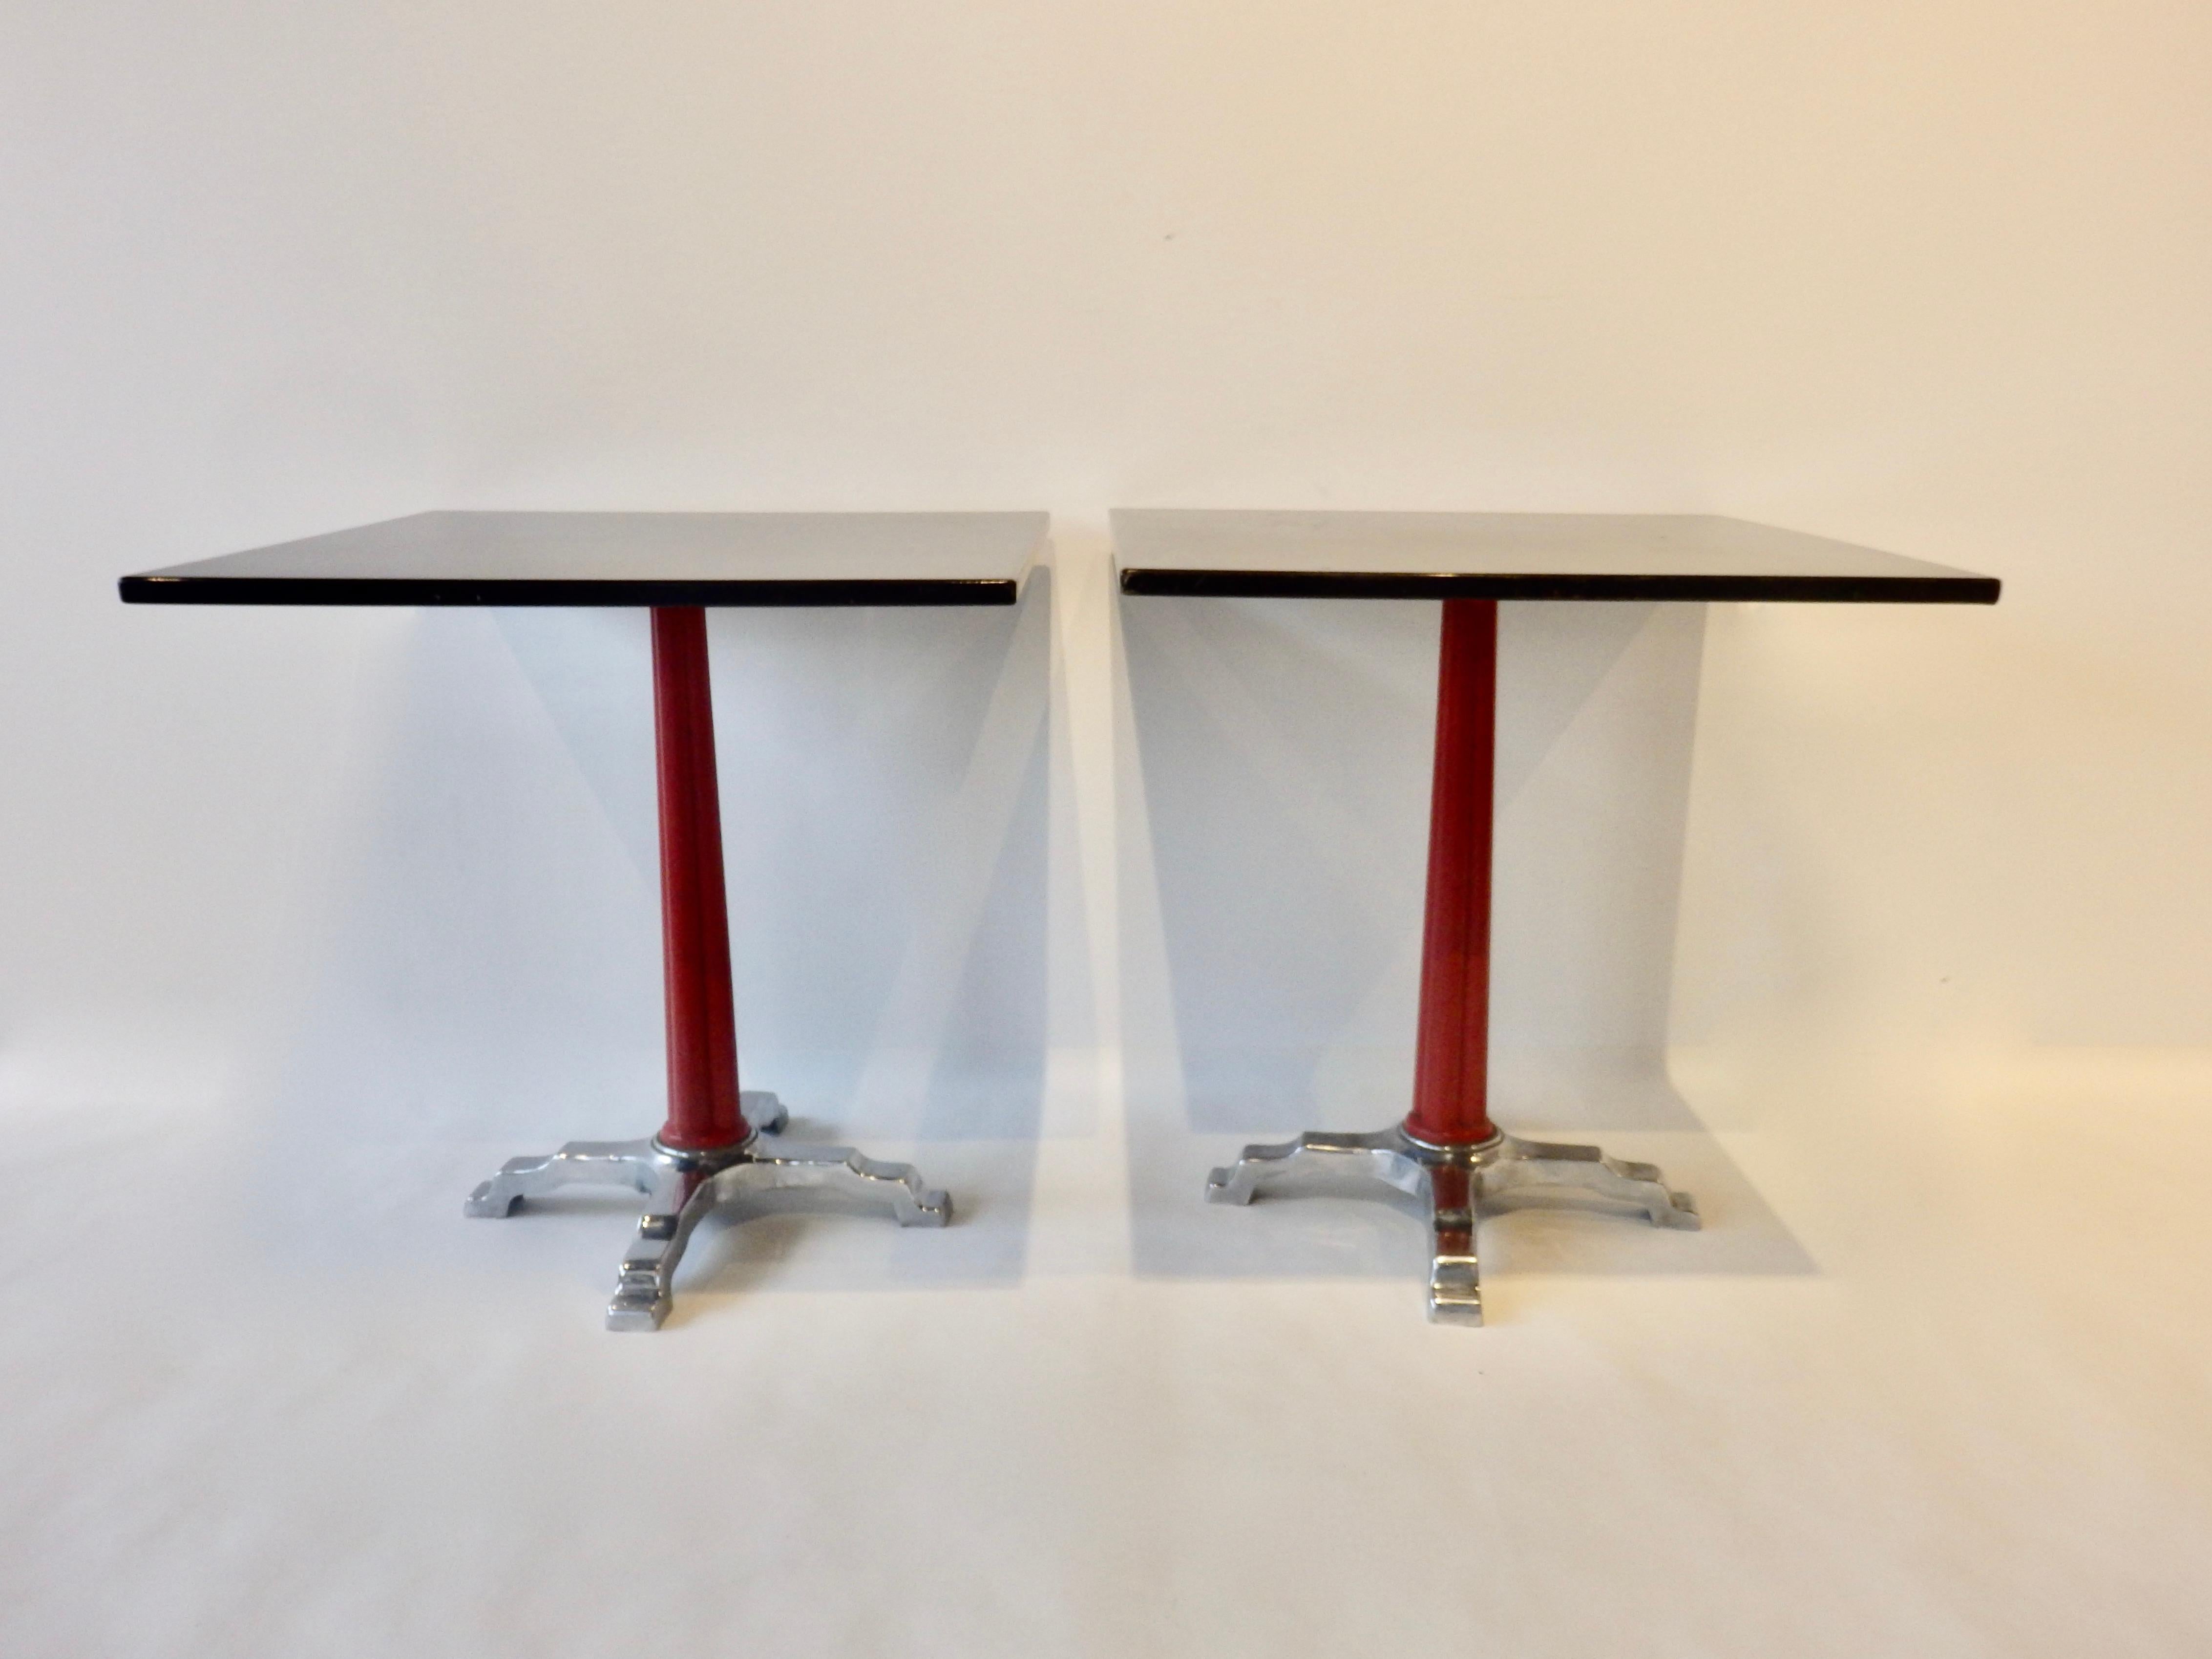 Four Art Moderne or Deco bistro dinette tables. Chrome cast iron base with lacquered column supports square black lacquered tops. Top surfaces show wear. Chrome shows age and patina. Not rusted. Priced individually.